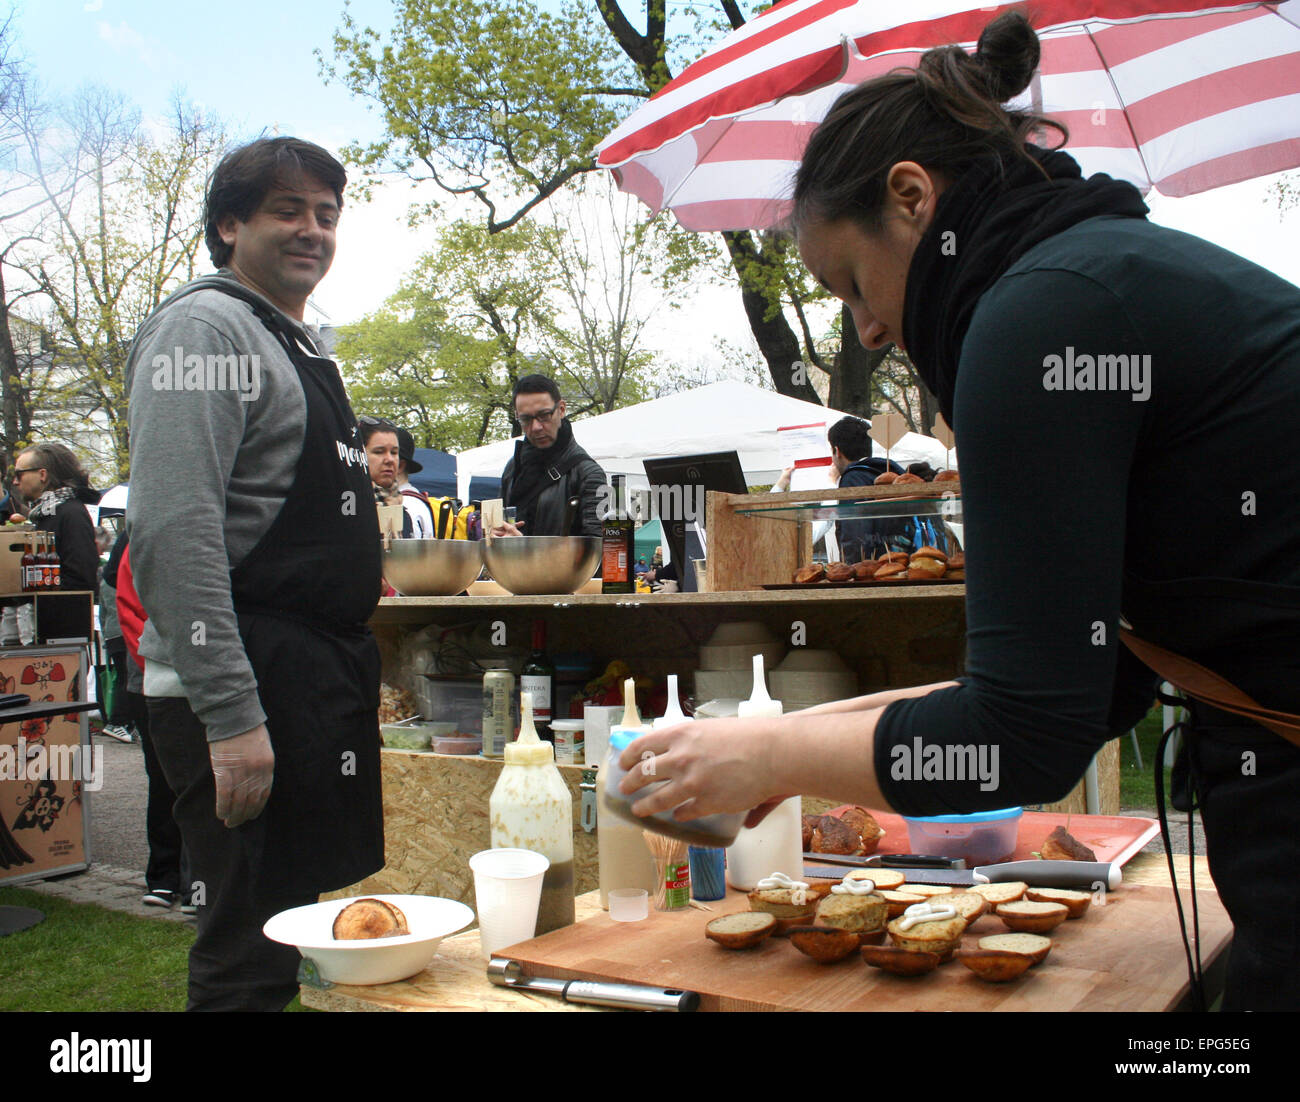 Helsinki, Finland. 16th May, 2015. Antonio Fernandez and his wife Laura Bravo from Spain offer mini blinis at their food stall during Restaurant Day in Helsinki, Finland, 16 May 2015. Photo: Julia Waeschenbach/dpa/Alamy Live News Stock Photo